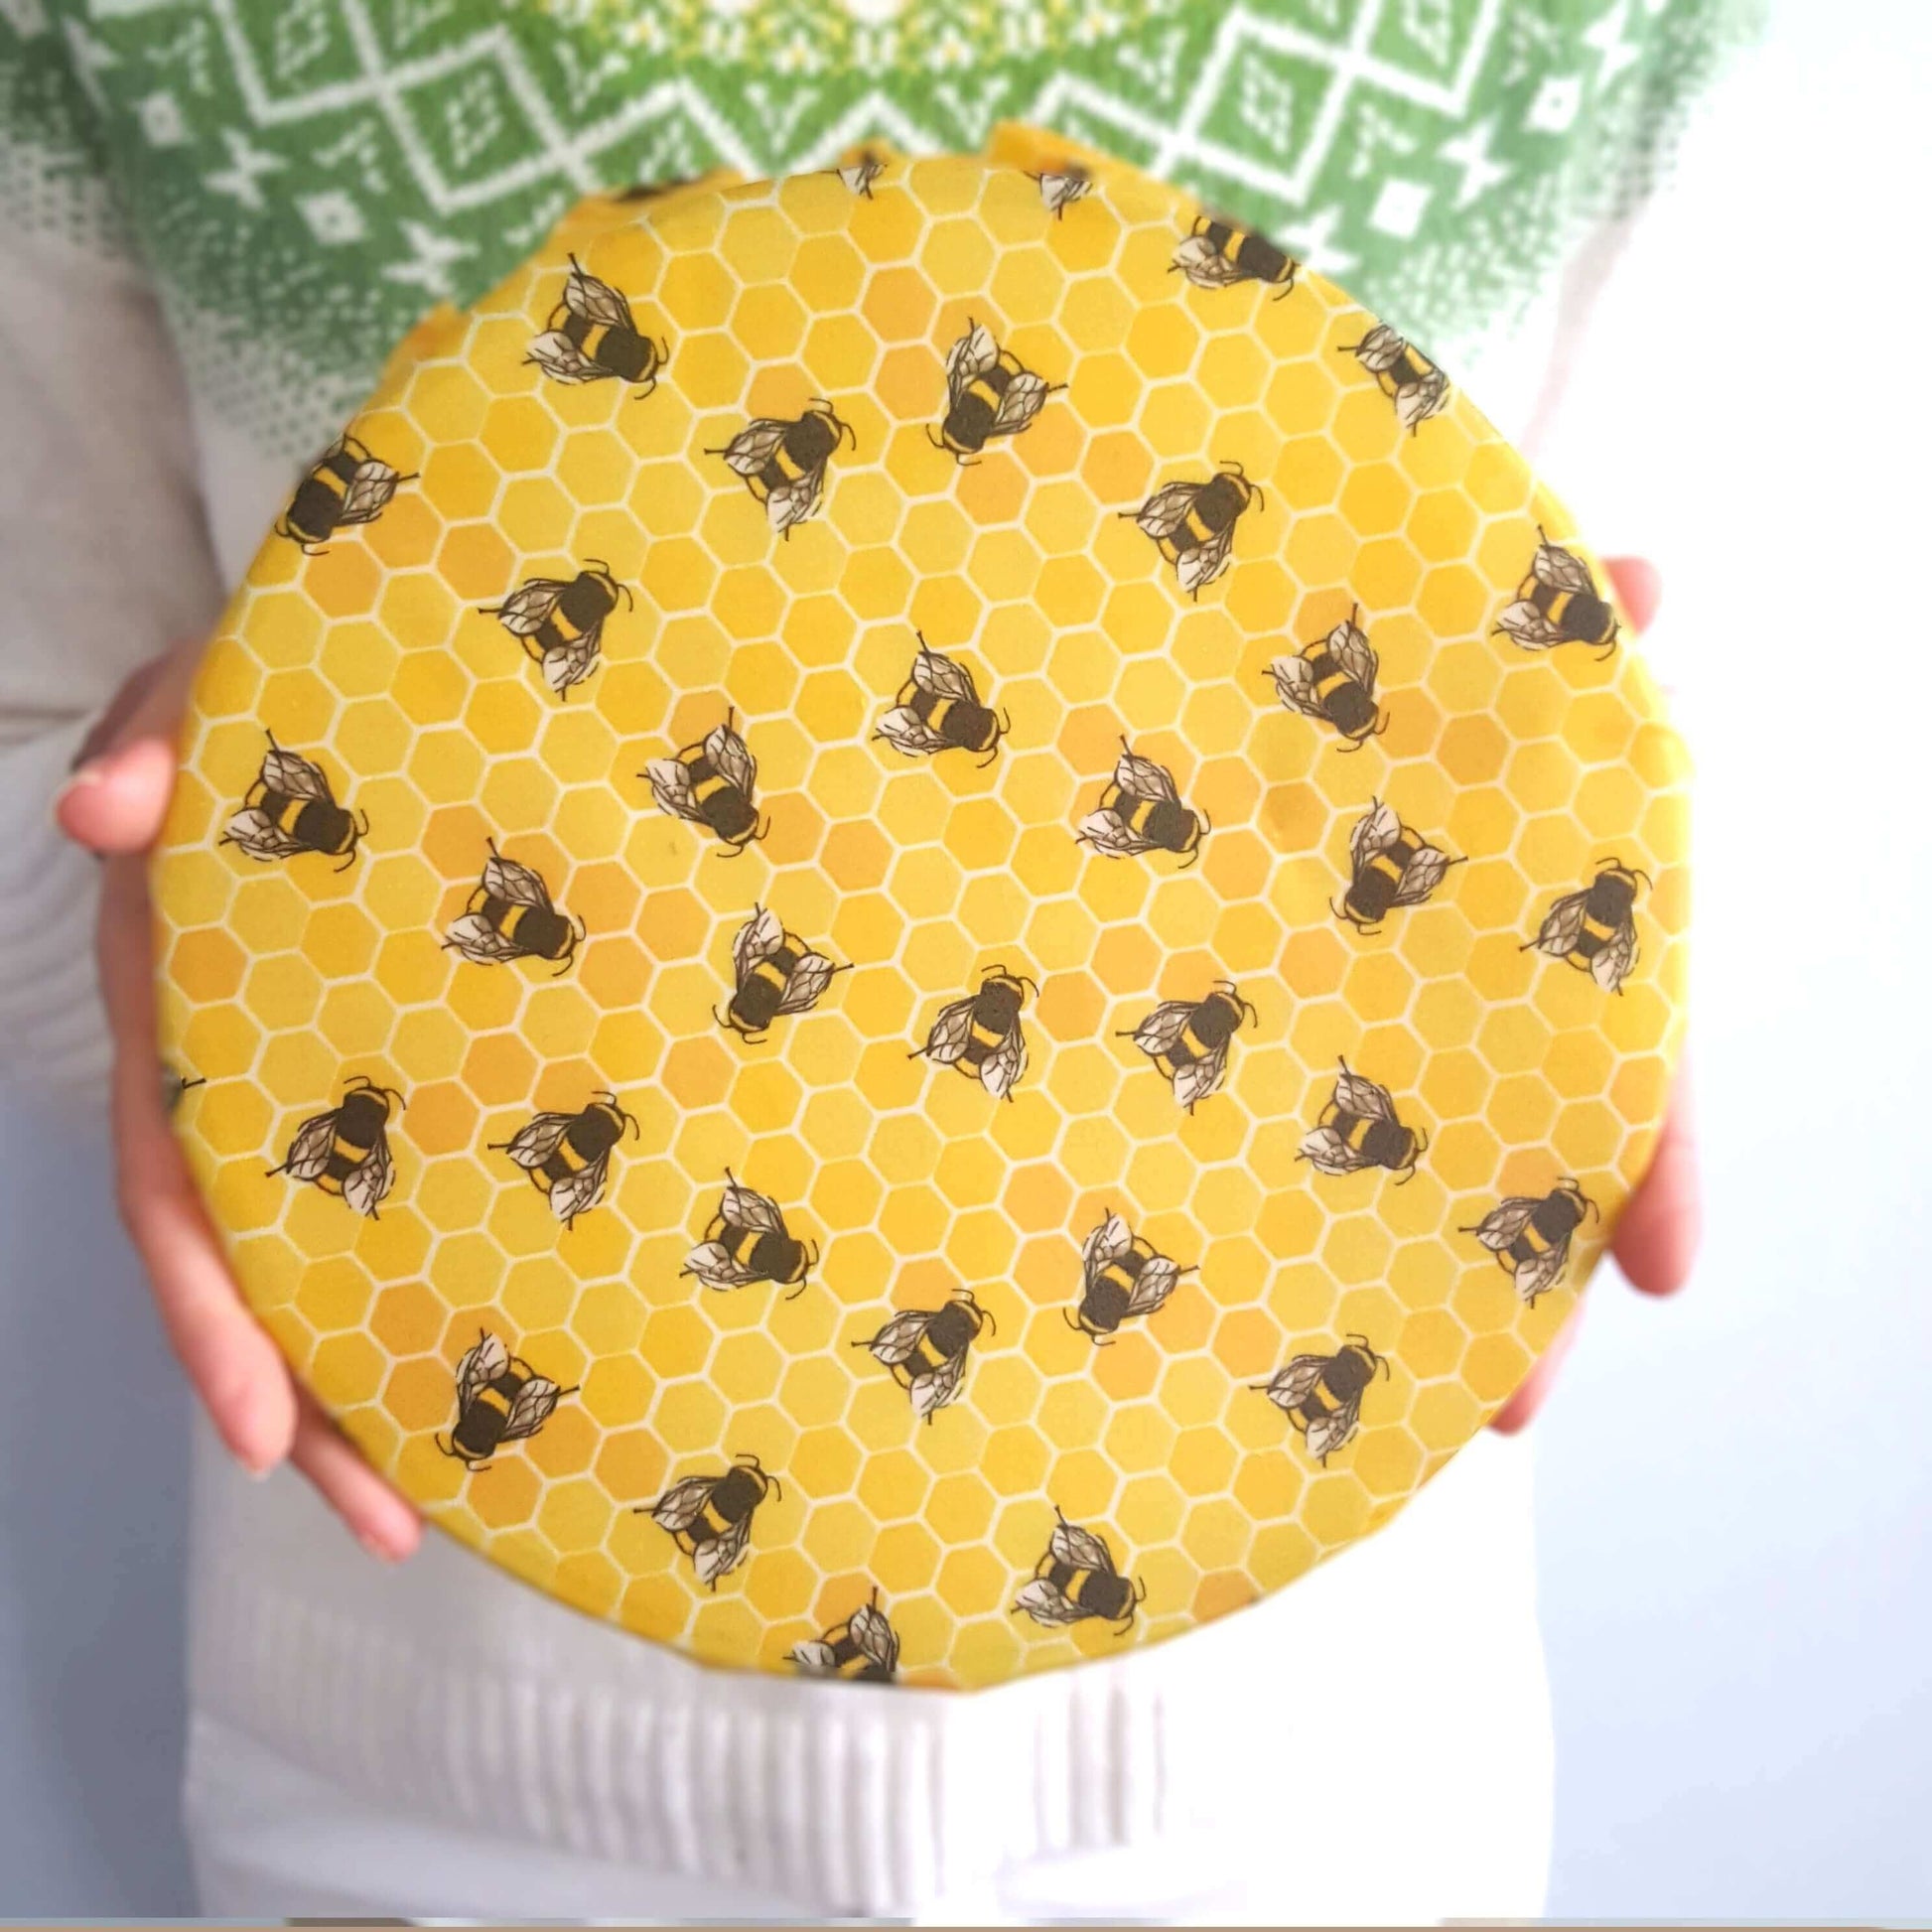 Yellow Bees Earth Kind Sandwich & Bowl Set of 2 Large Beeswax Wraps shown in use